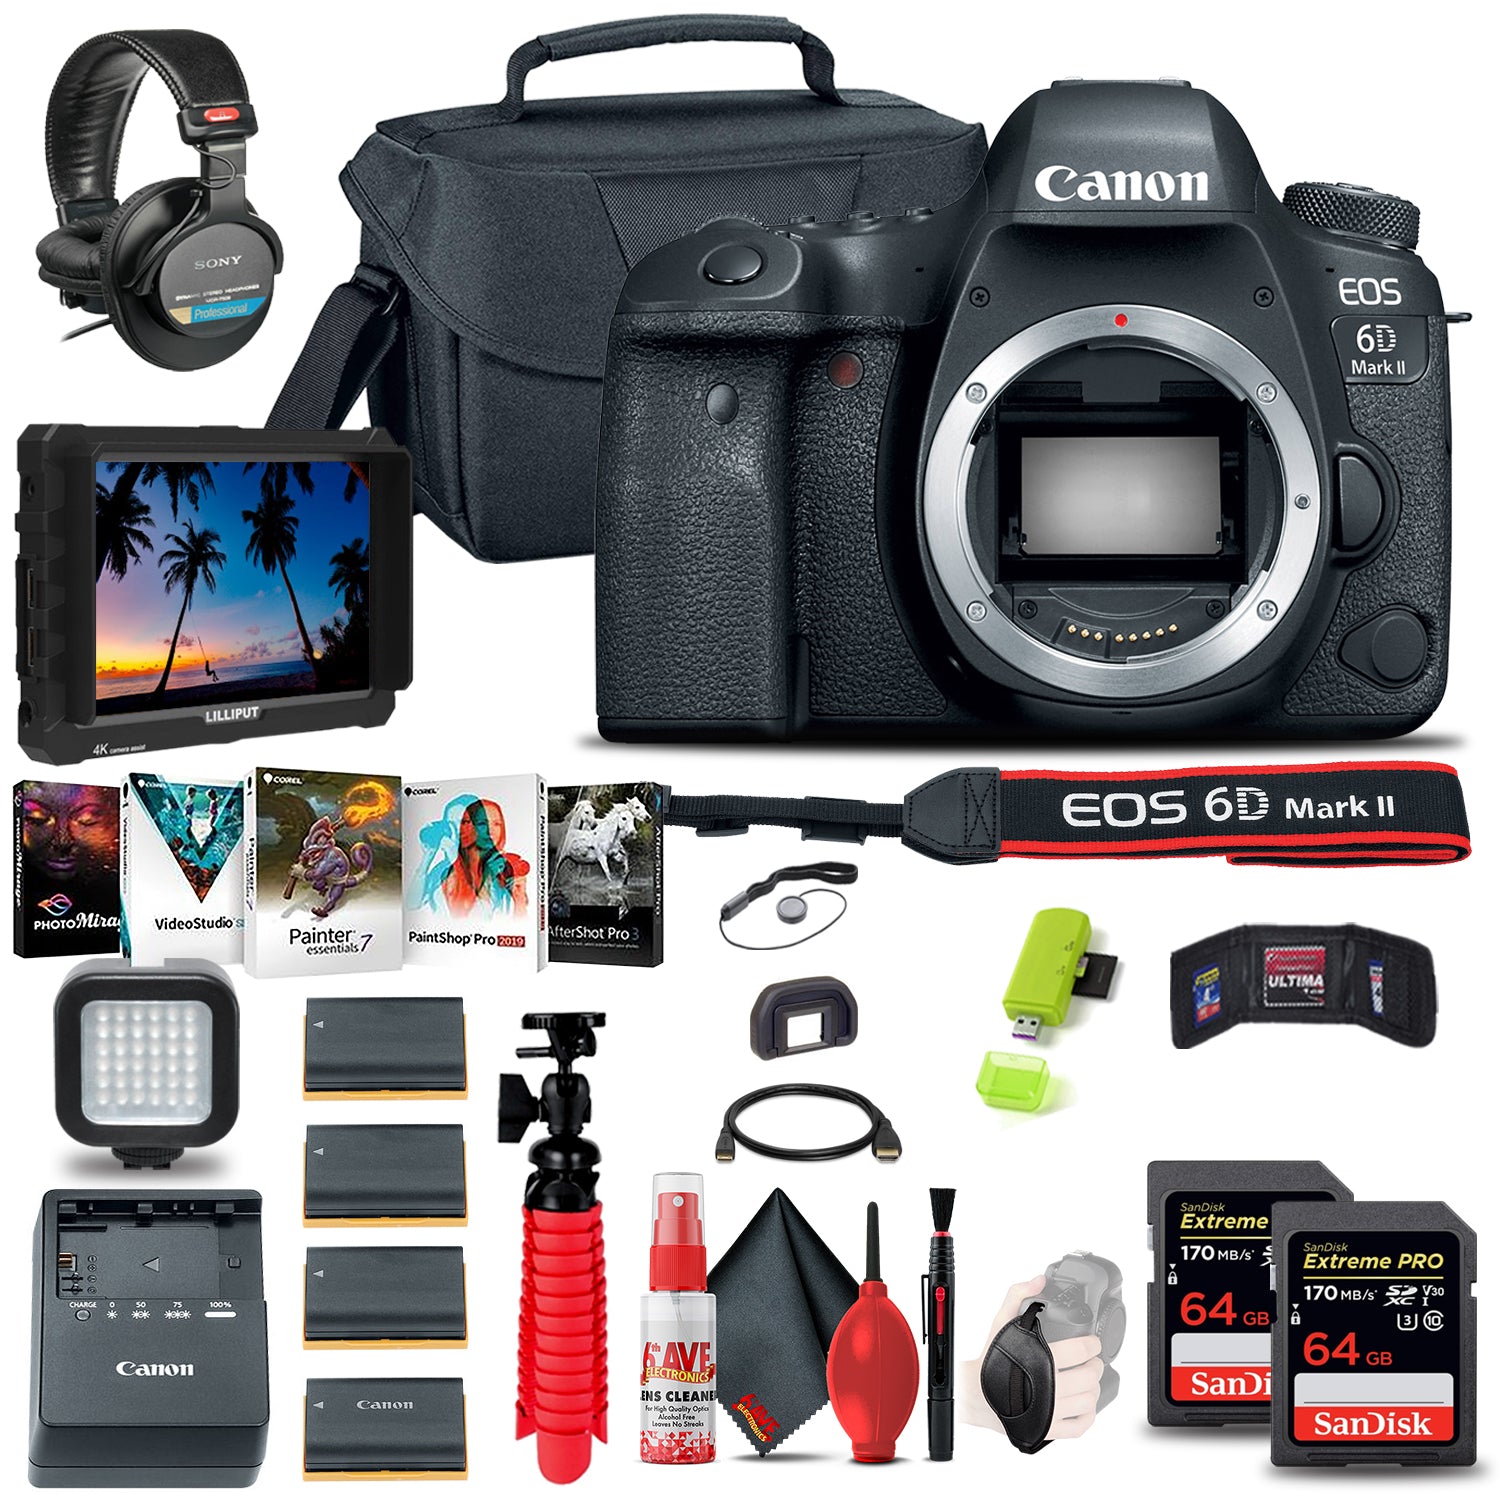 Canon EOS 6D Mark II DSLR Camera (Body Only) (1897C002) + 4K Monitor + More